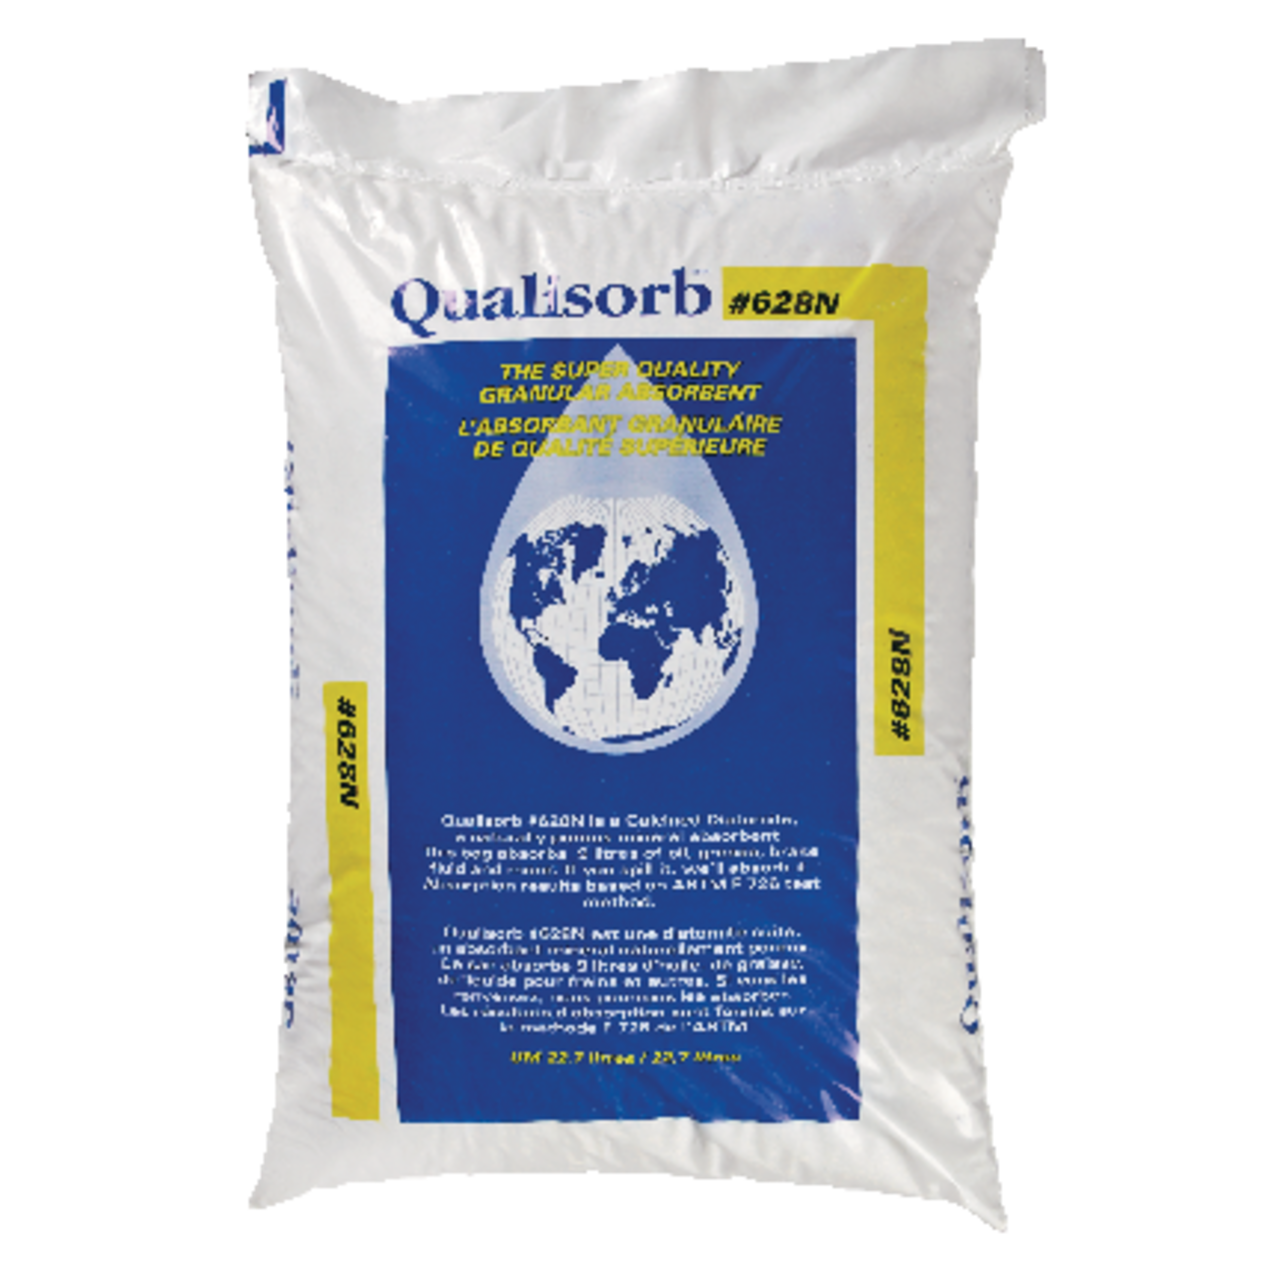 Qualisorb Oil, Grease & Fluid Absorbent All Natural, 22.7L